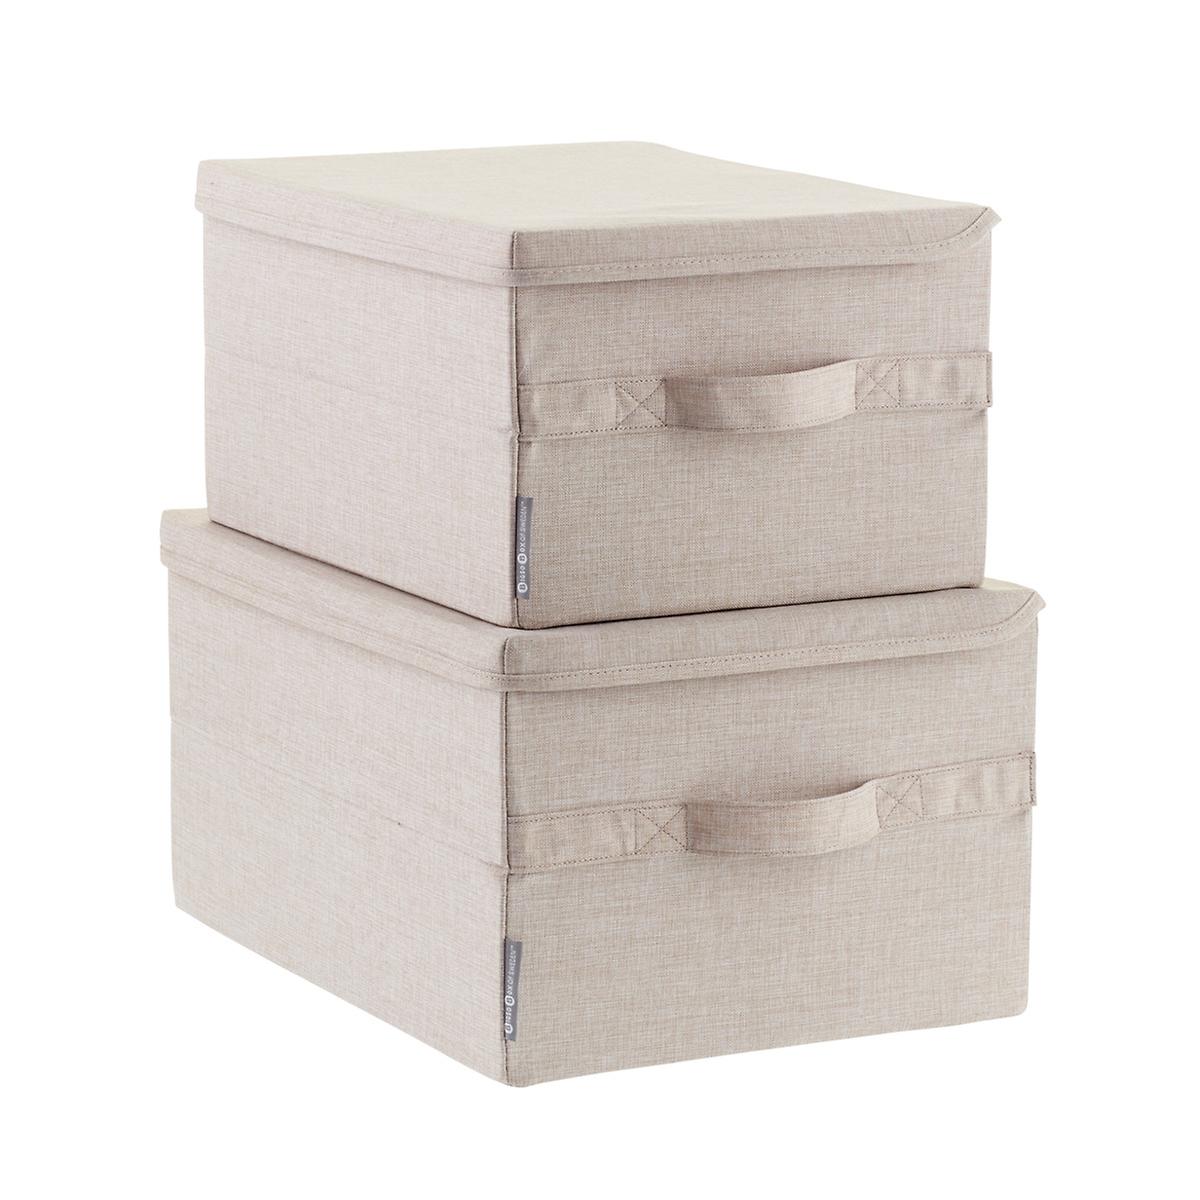 Bigso Flax Soft Storage Boxes with Handles